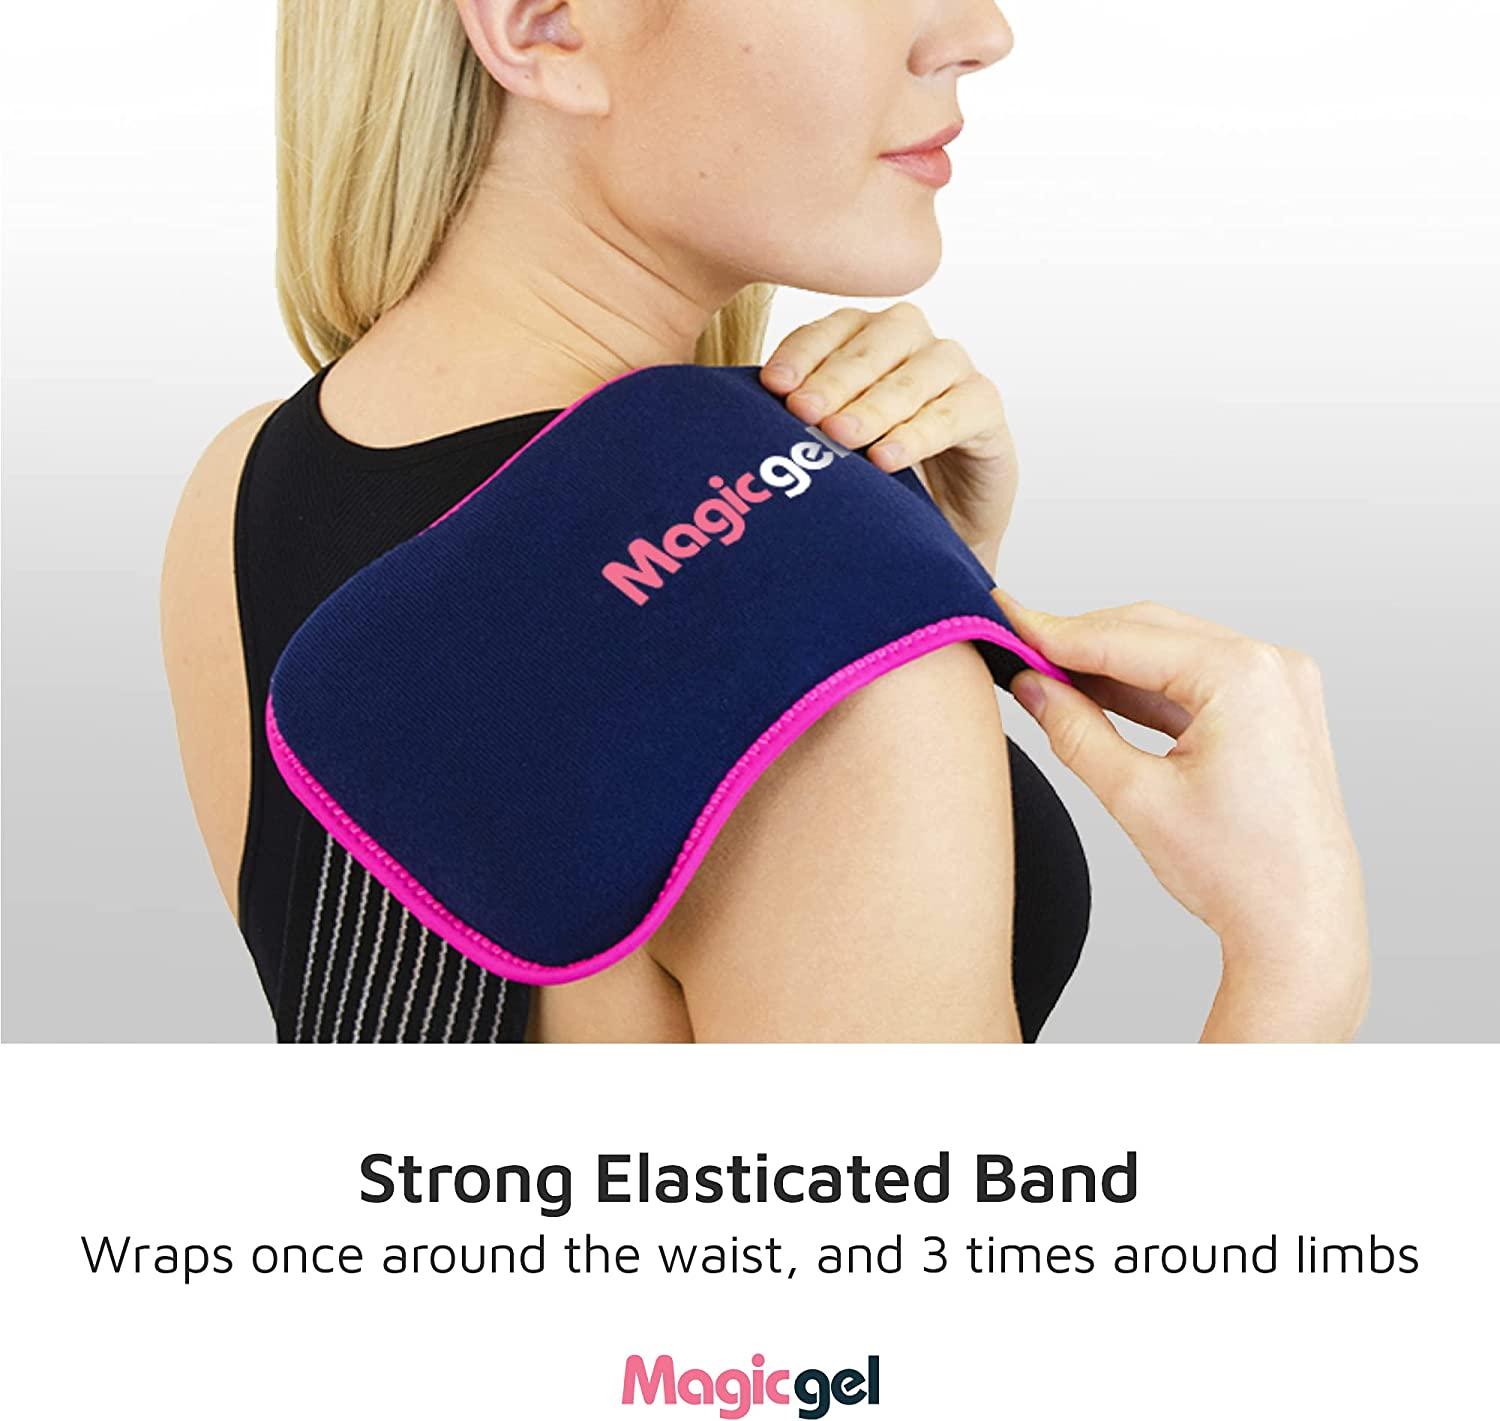 Flexible Neck Ice Pack for Pain Relief, and Shoulder Pain - Magicgel –  Gelpacks